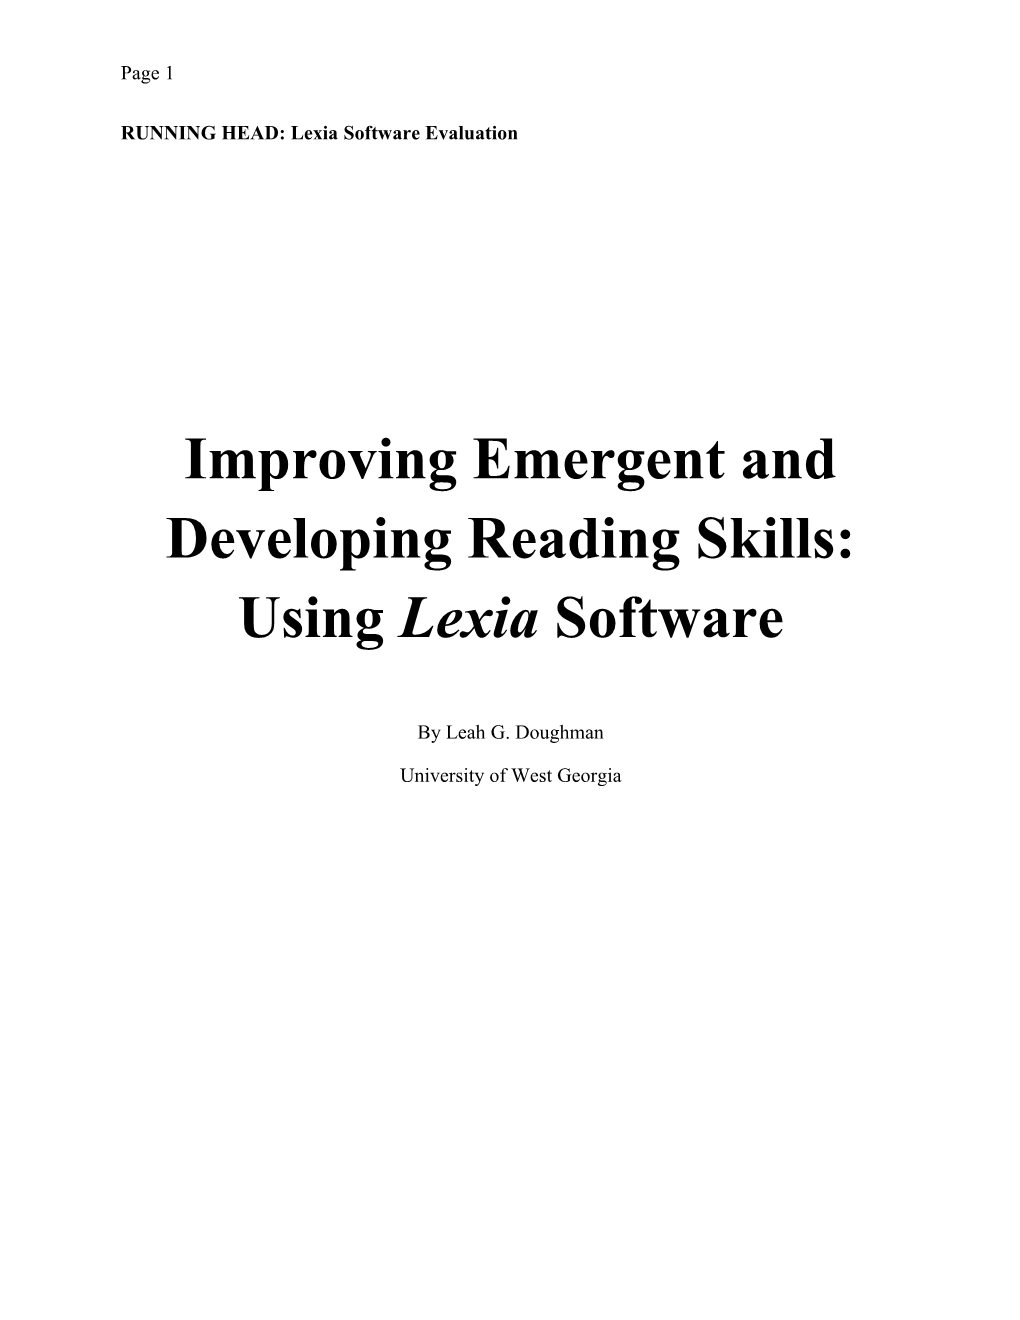 RUNNING HEAD: Lexia Software Evaluation